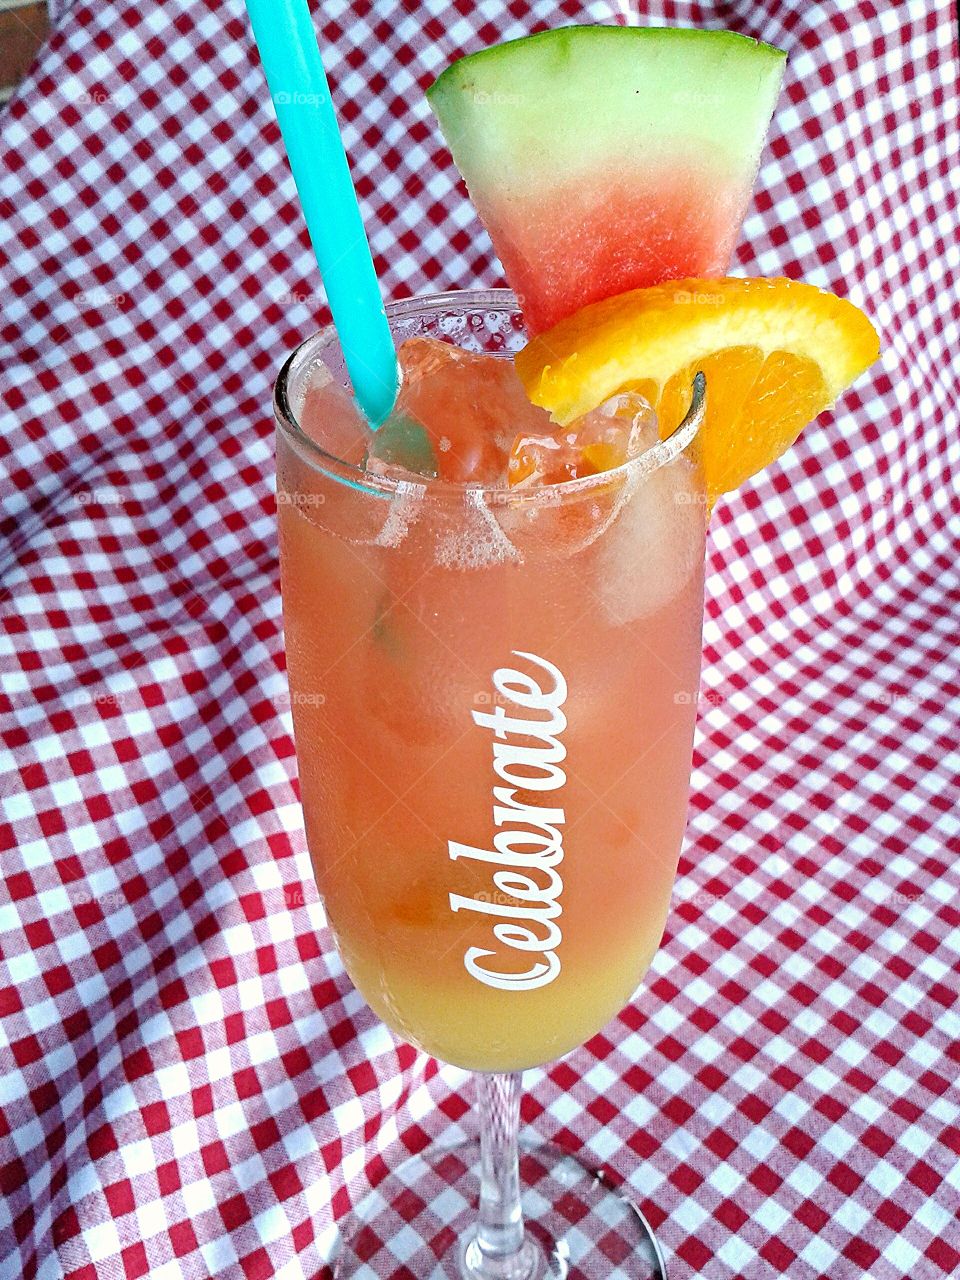 Summer cocktail on the patio. A fresh fruit cocktail garnished with my Sumner favorites.